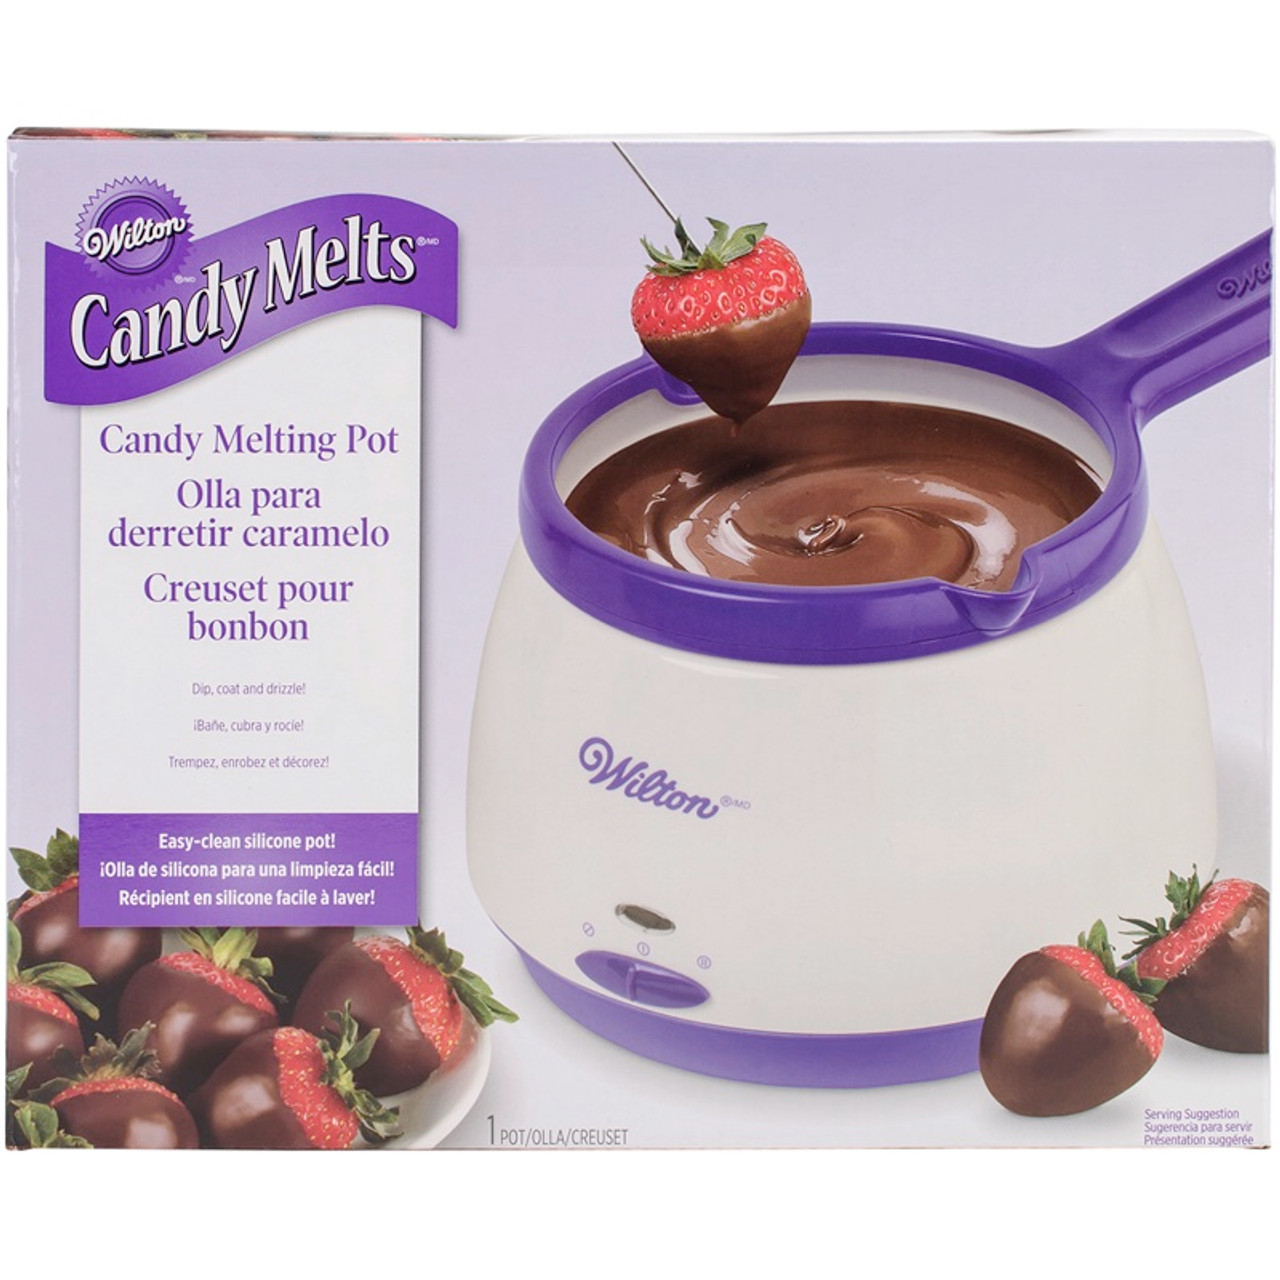 Save on Wilton Candy Melts Pink Order Online Delivery